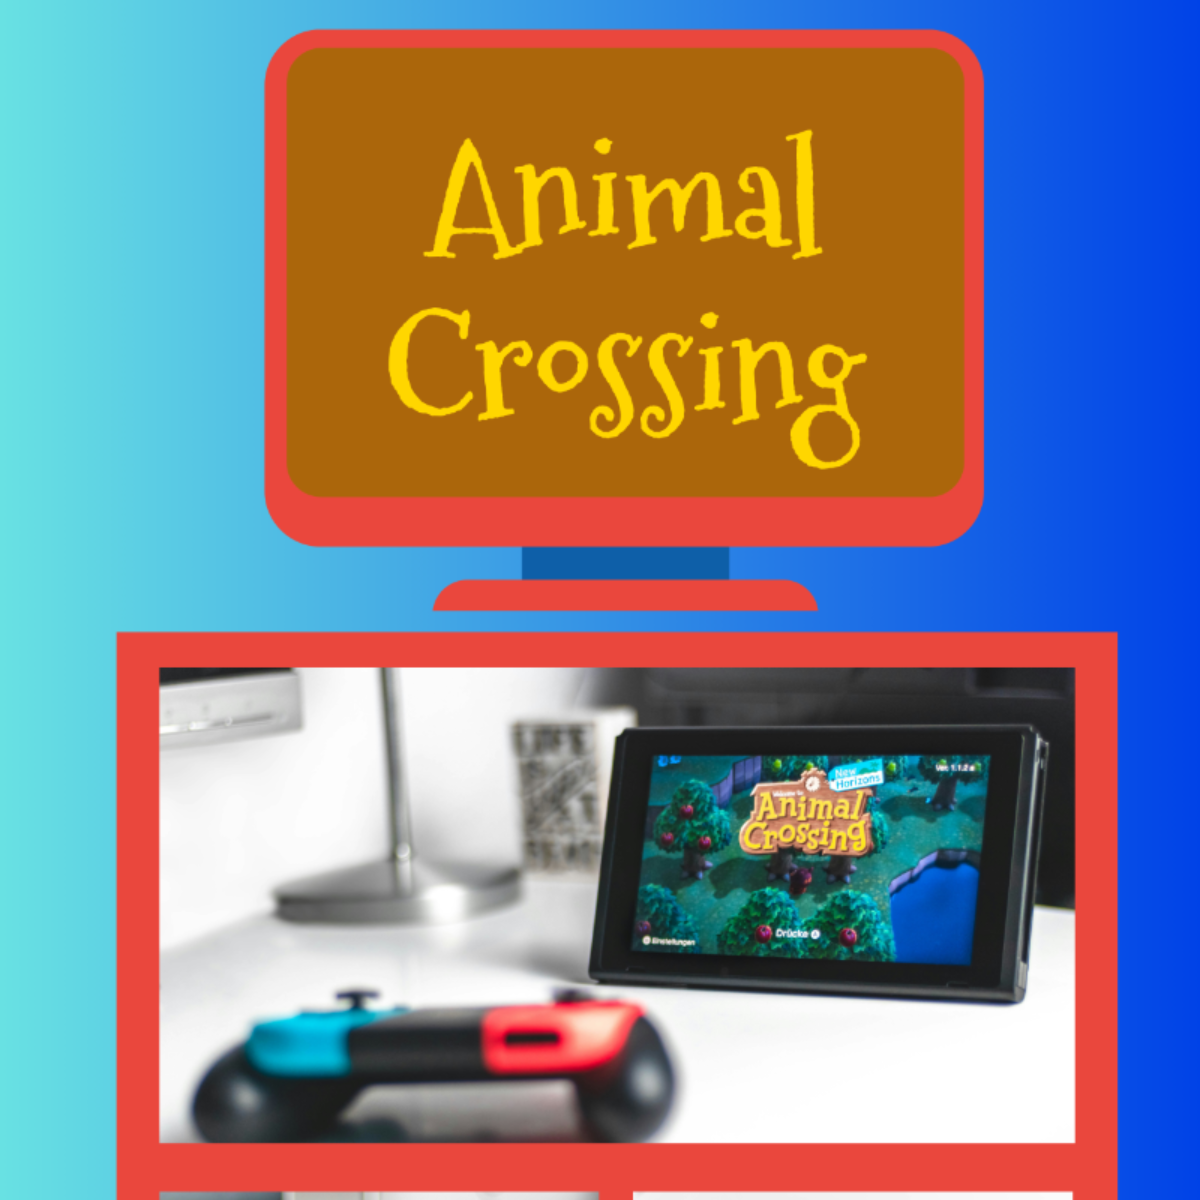 Animal Crossing Itinerary Template